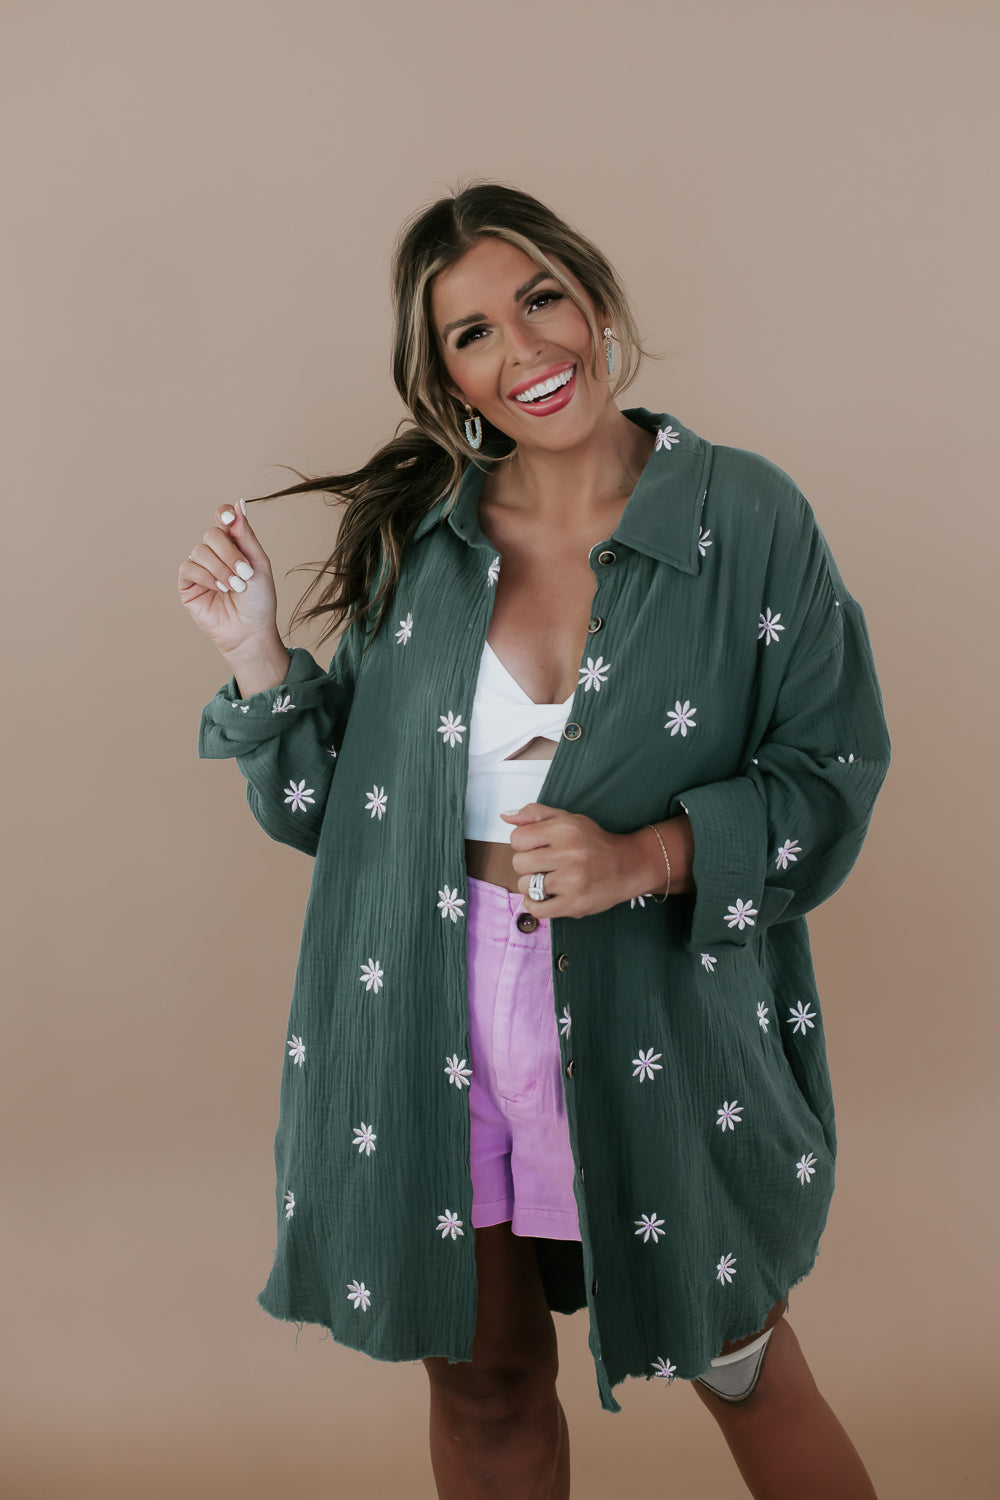 Oversized Button Up Floral Embroidered Top, Teal